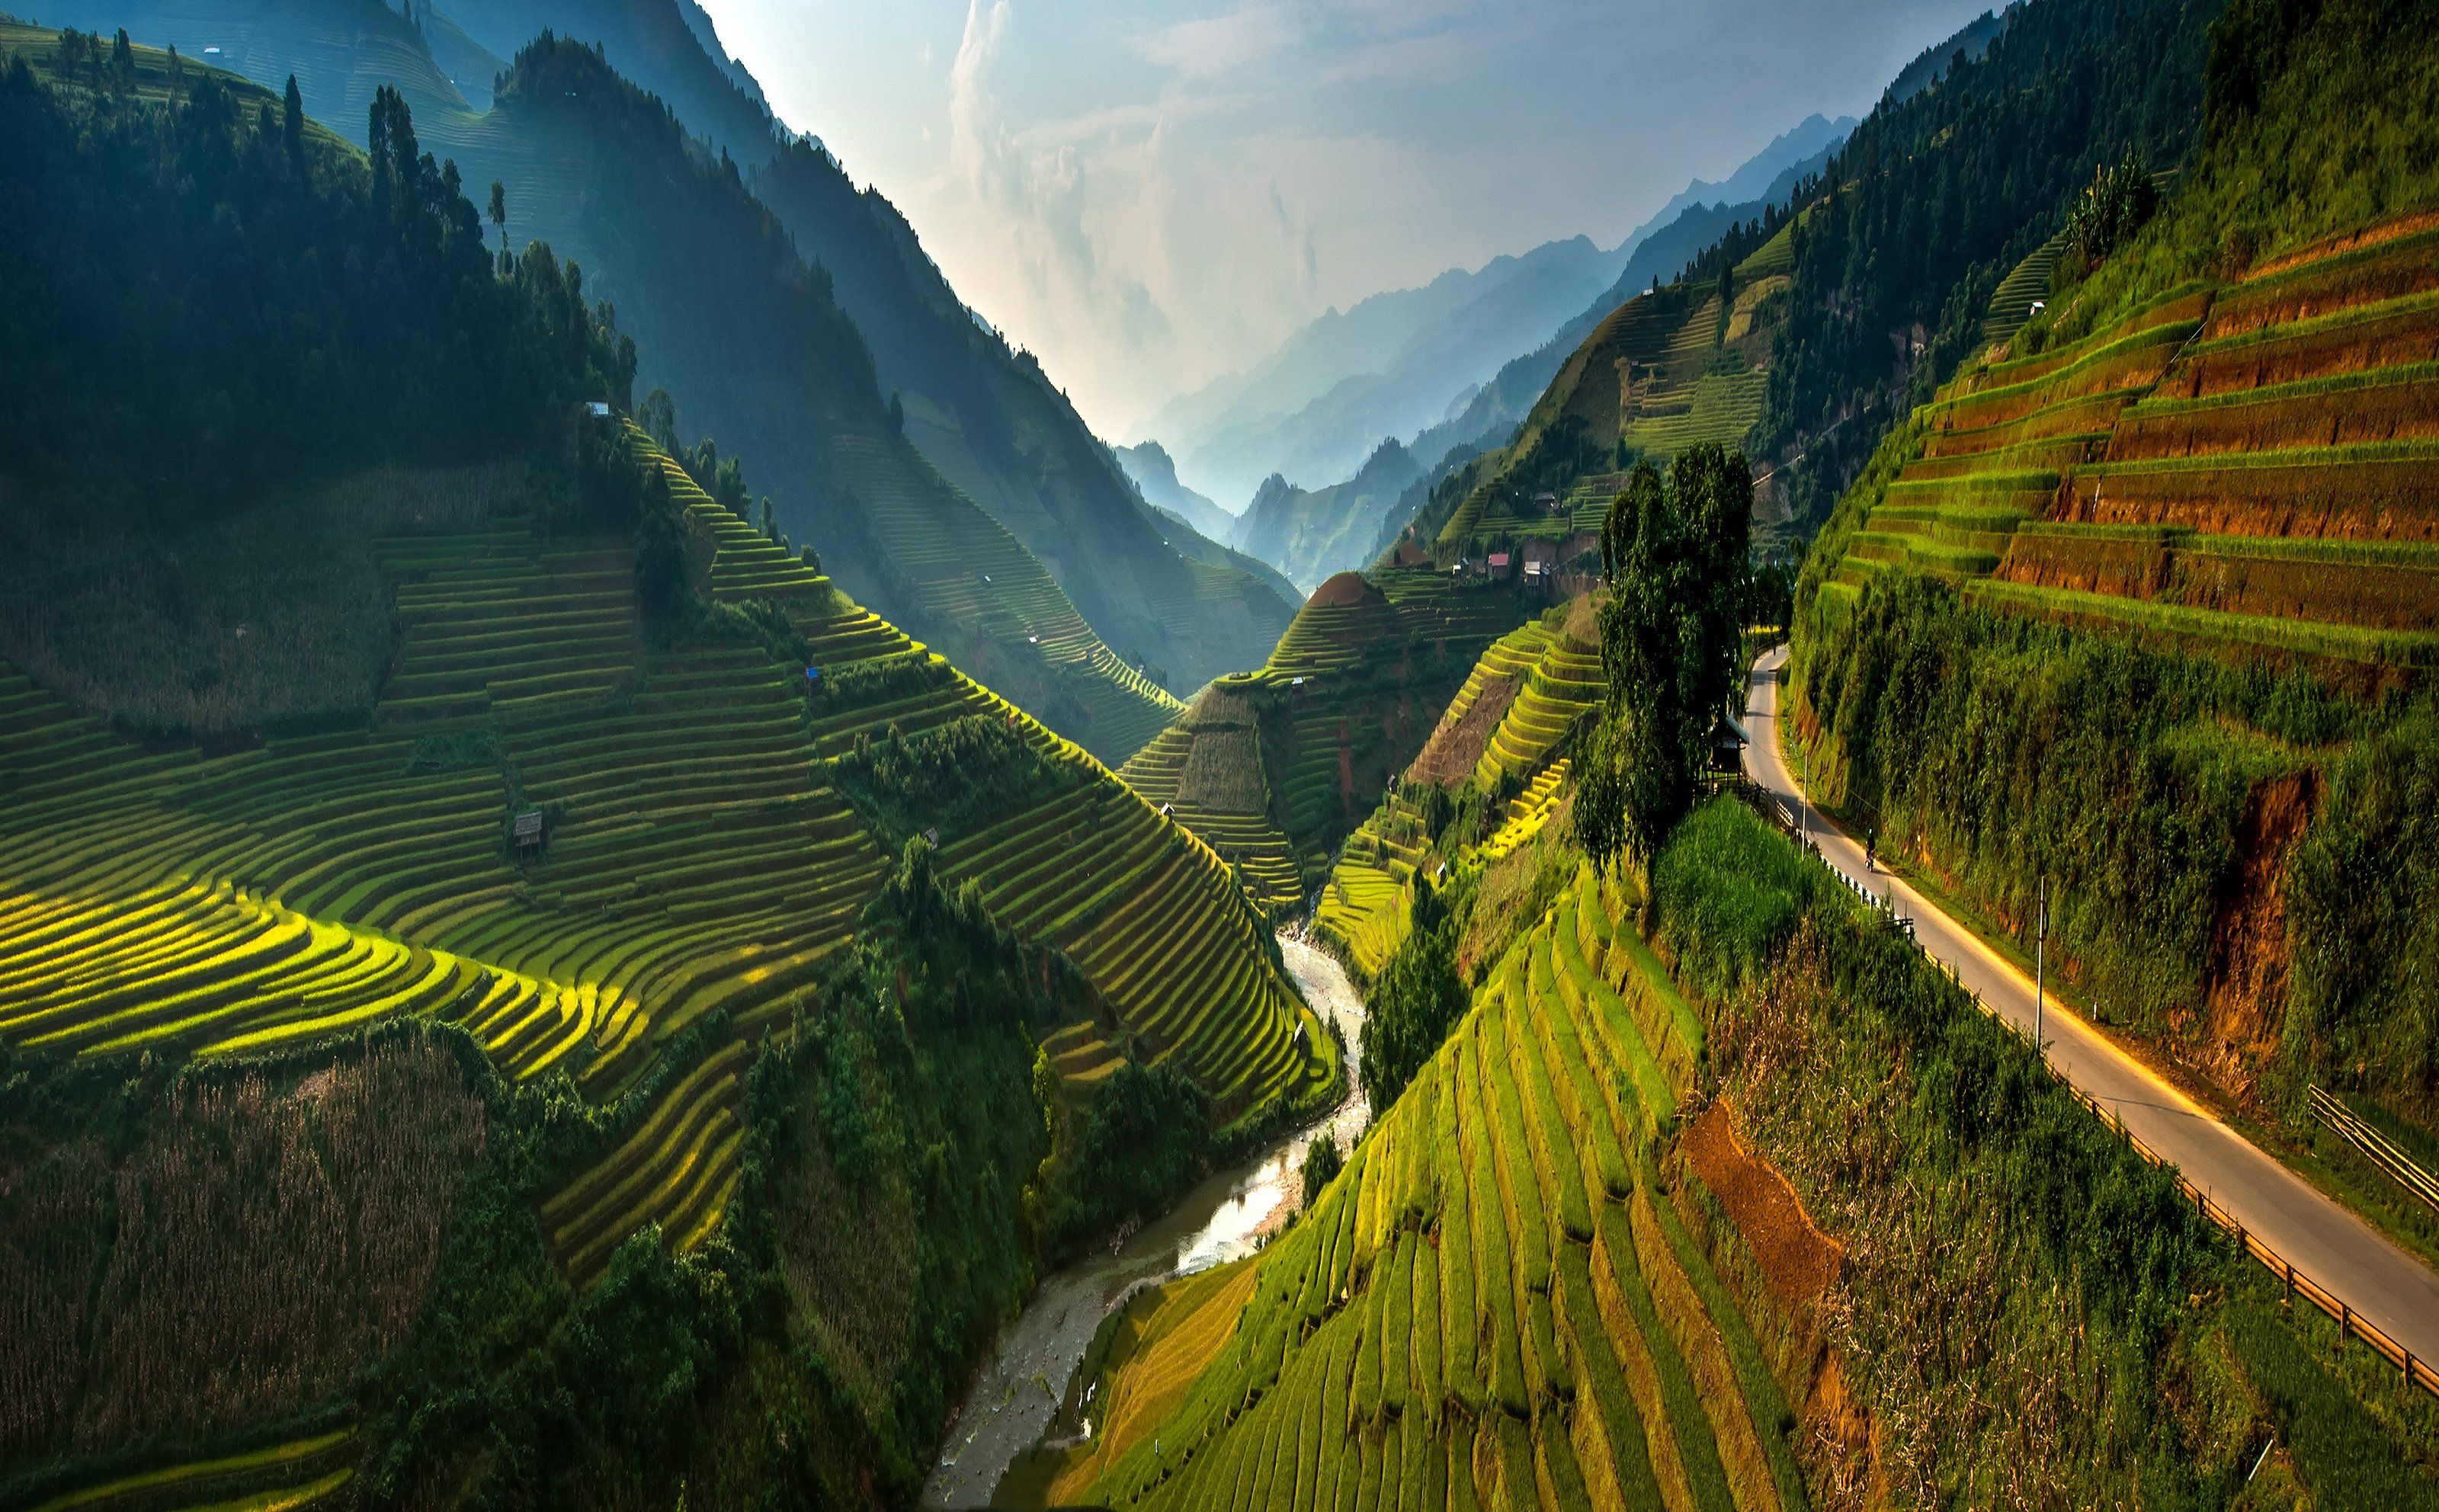 Vietnam, Landscape, Scenics, Agriculture, Beauty In Nature, Color Image, Day, Farm, Field, Green Color, Growth, High Angle View, Horizontal, Lush Foliage, Mountain, Mountain Range, Nature, No People, Outdoors, Photography, Rice Paddy, Sunlight, Terraced F, sarawut intarob